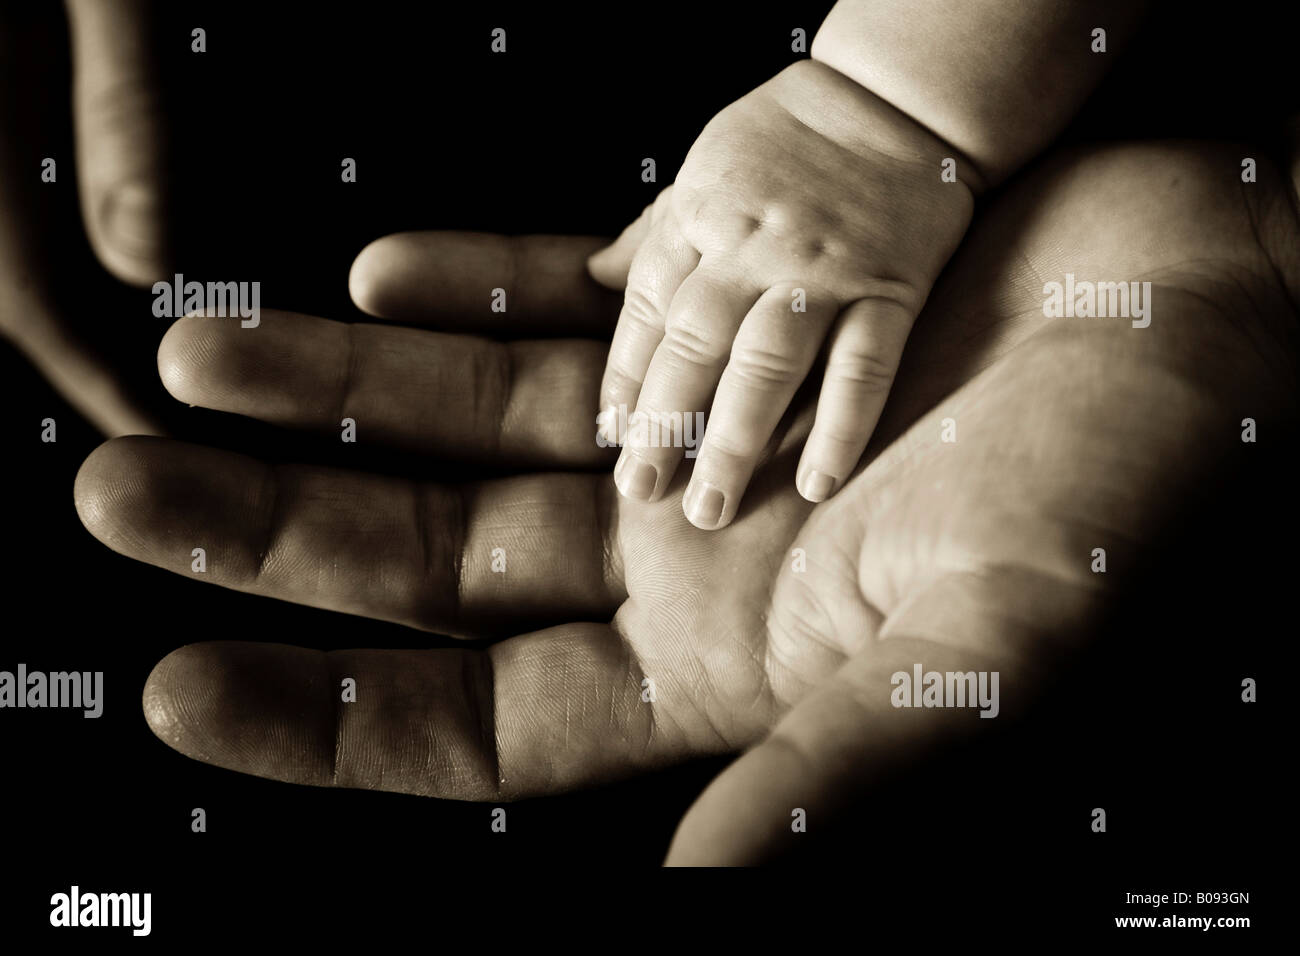 Baby's hand in father's hand Stock Photo